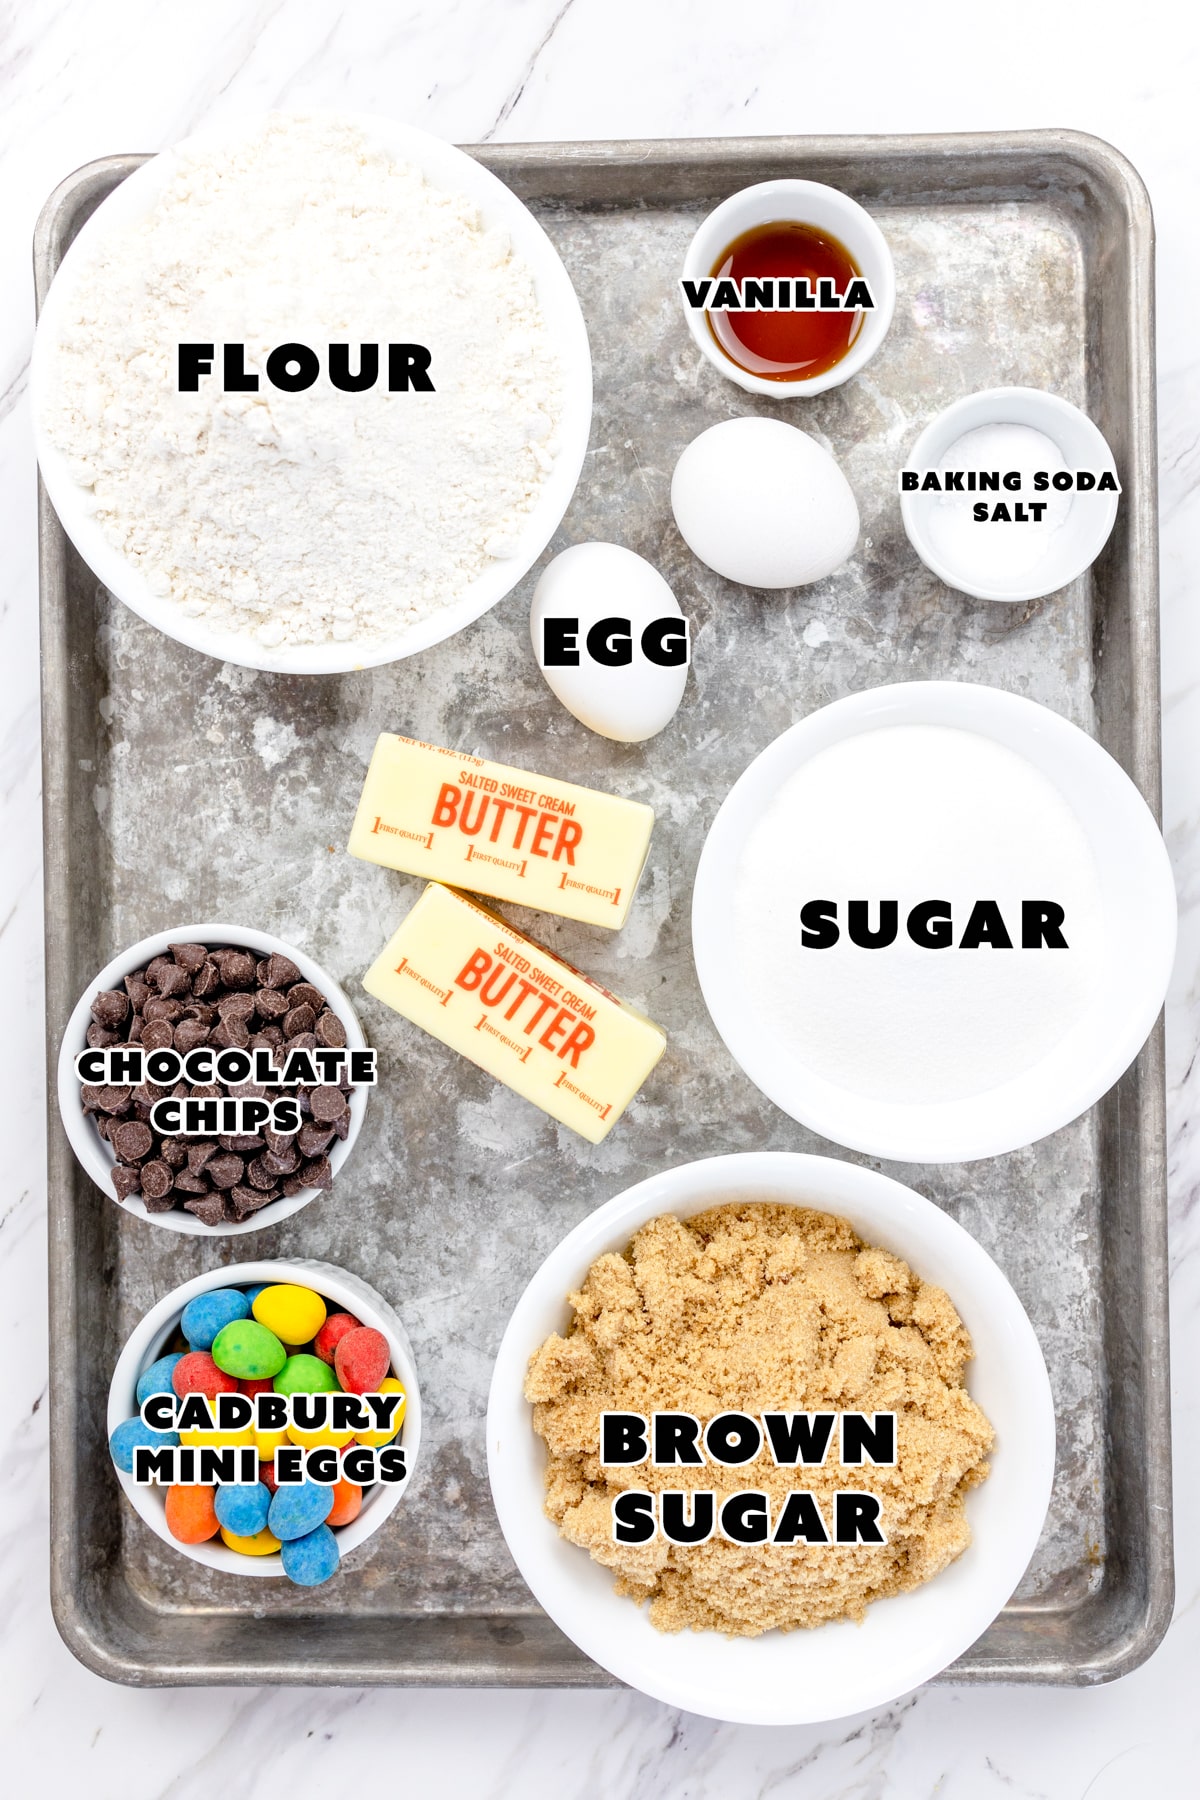 Top view of ingredients needed to make Cadbury Mini Egg Cookies in small bowls on a baking tray with labels on them. 